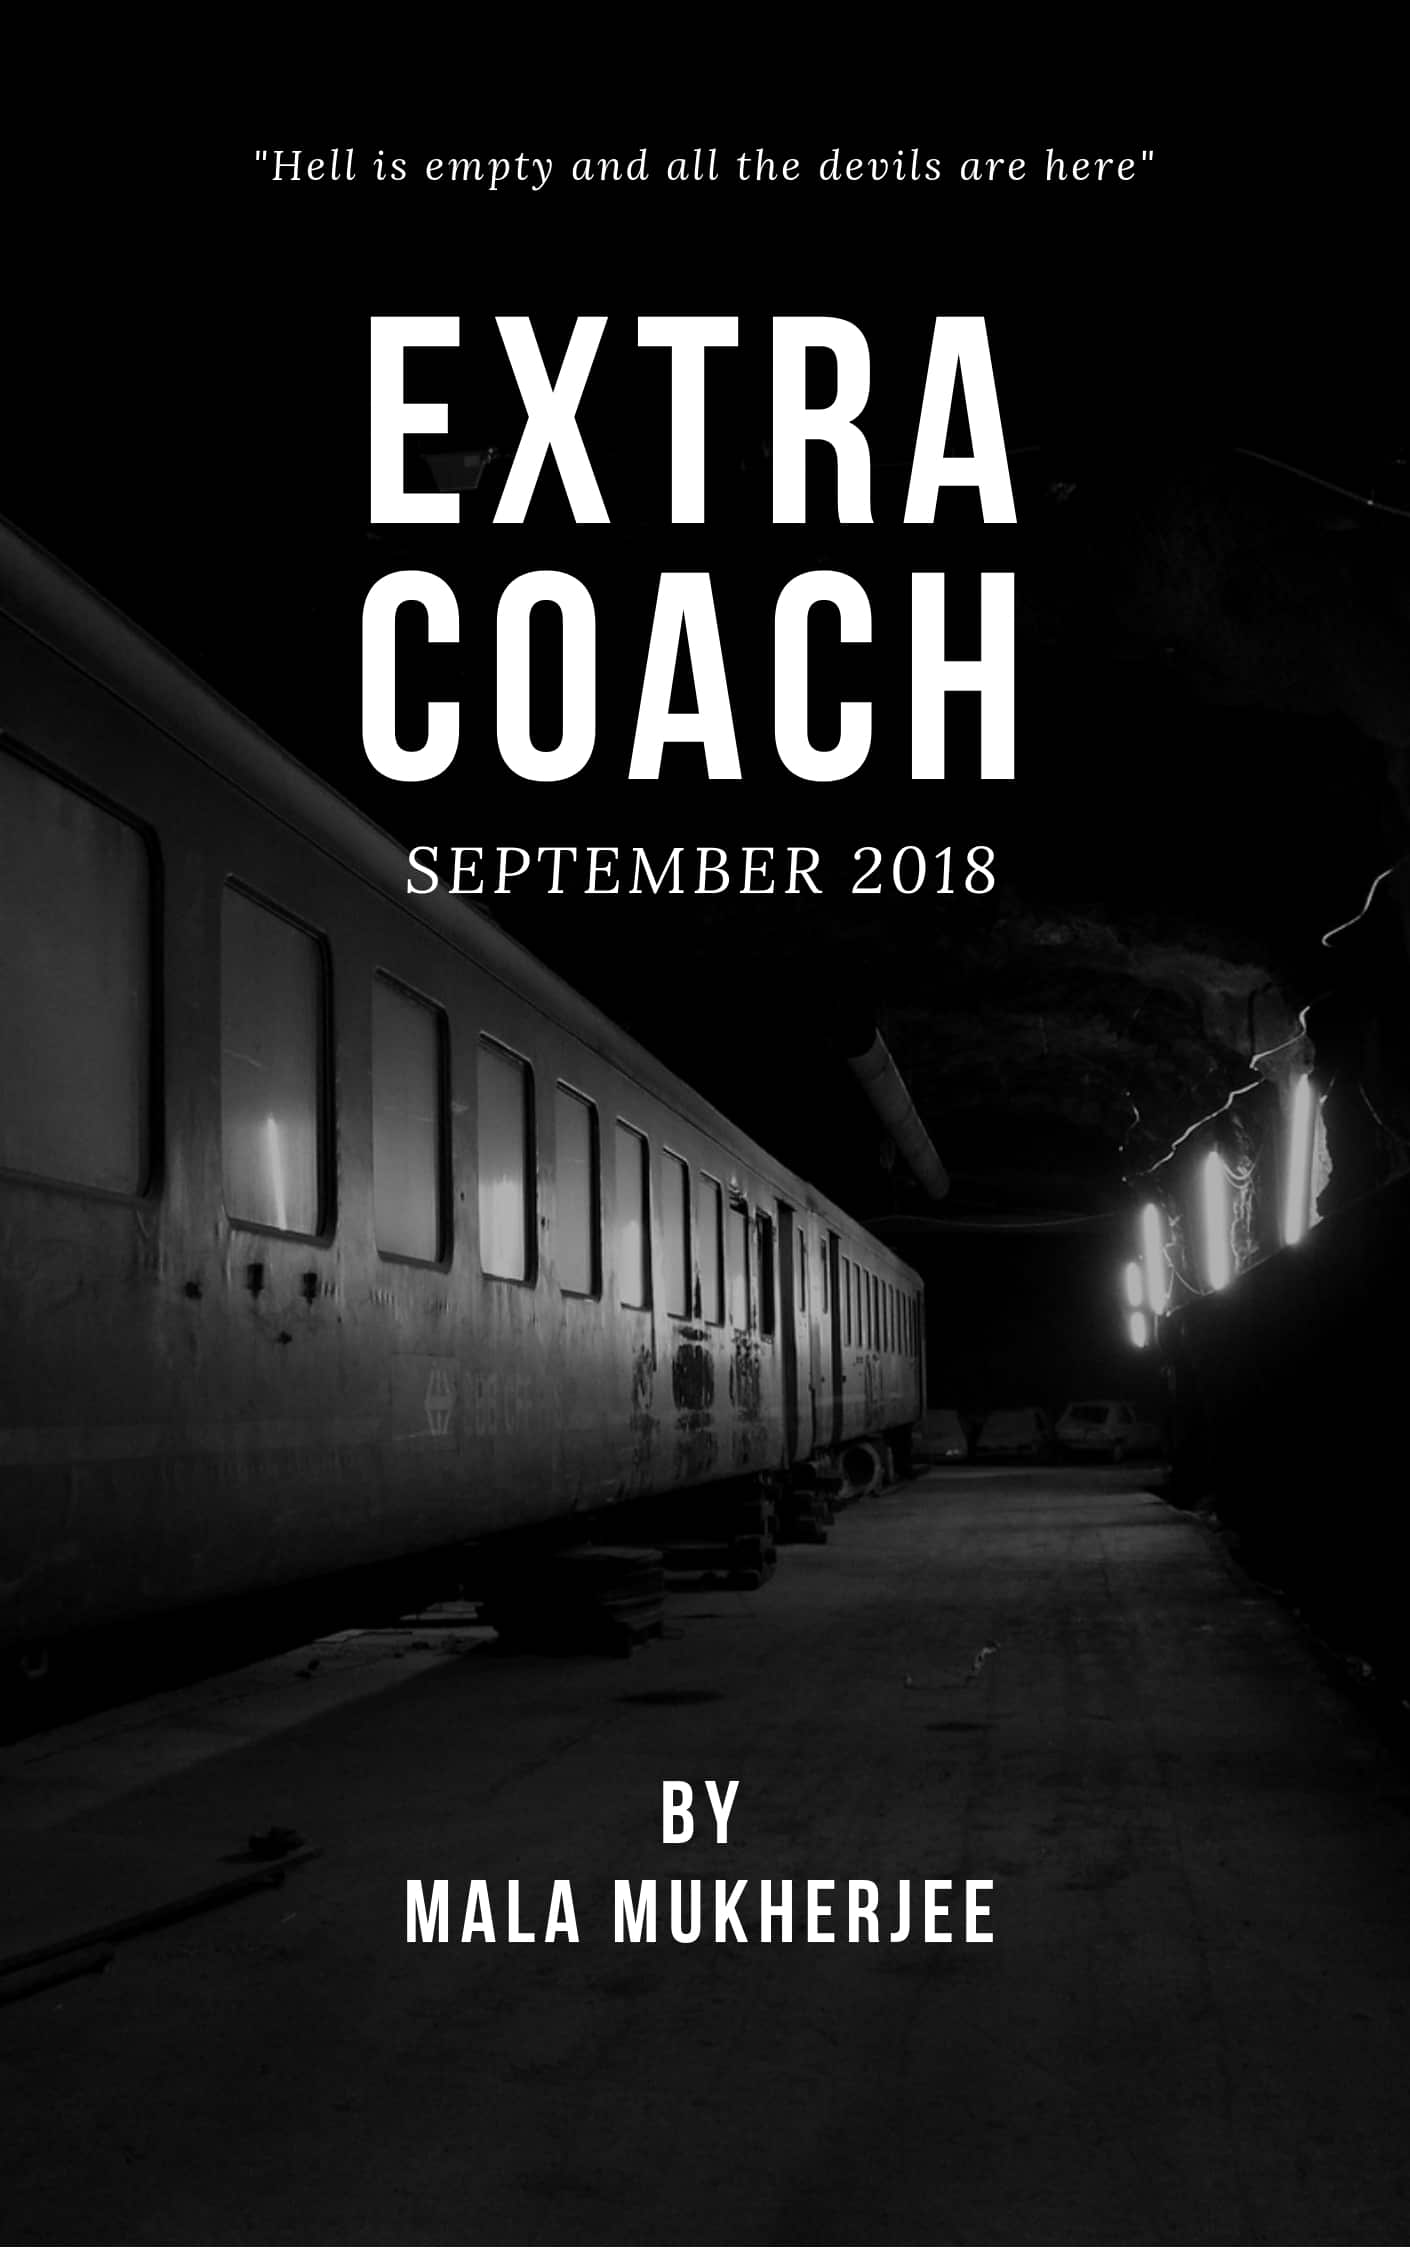 horror-story-extra coach-alignthoughts